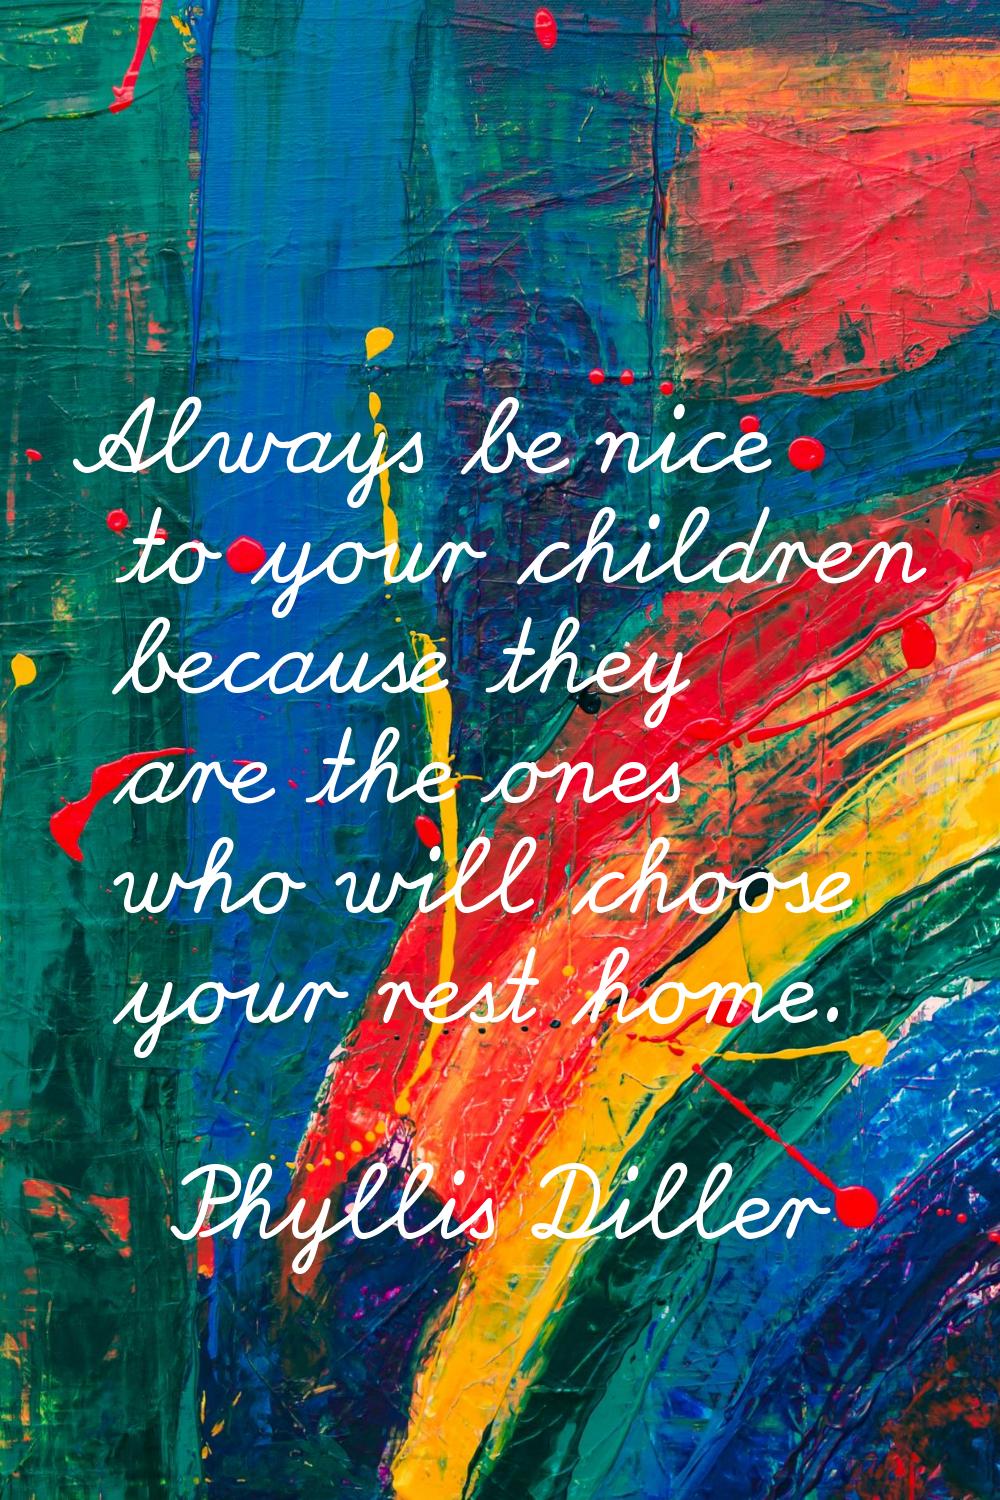 Always be nice to your children because they are the ones who will choose your rest home.